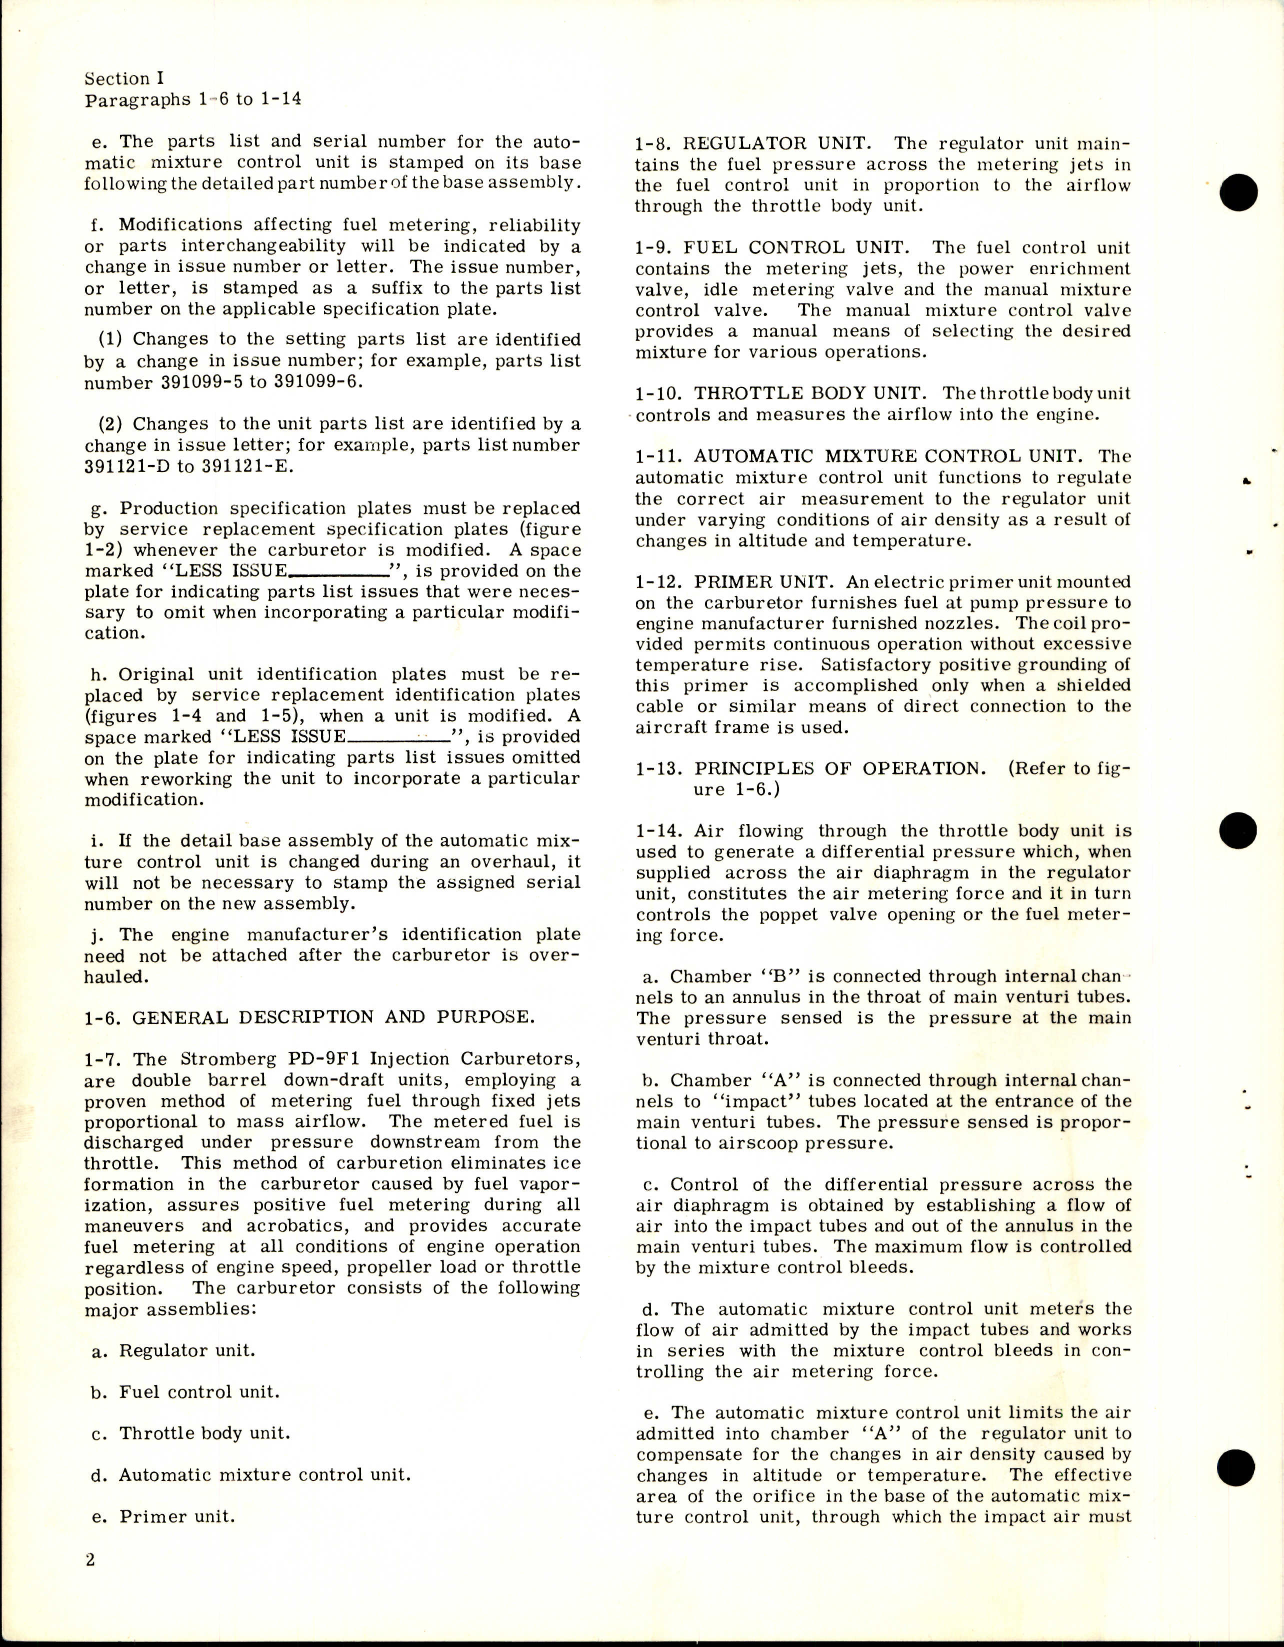 Sample page 6 from AirCorps Library document: Overhaul Instructions for Injection Carburetors Model PD-9F1 Used on R-1300 Engines